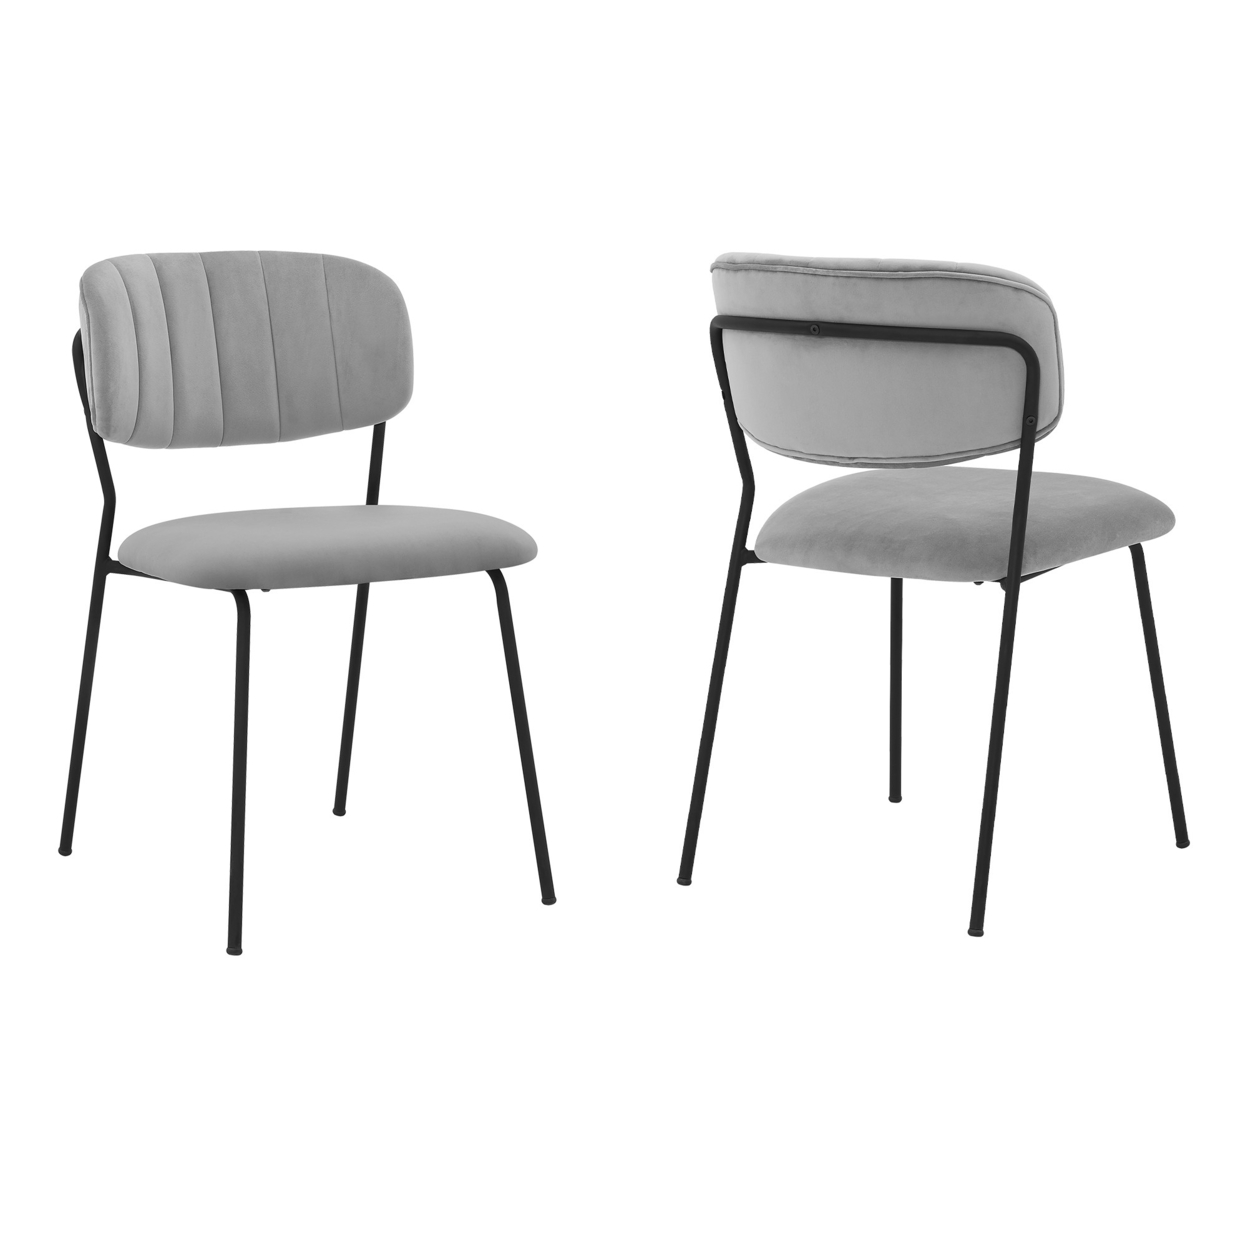 Metal Dining Chair With Fabric Seats,Set Of 2,Black And Gray- Saltoro Sherpi